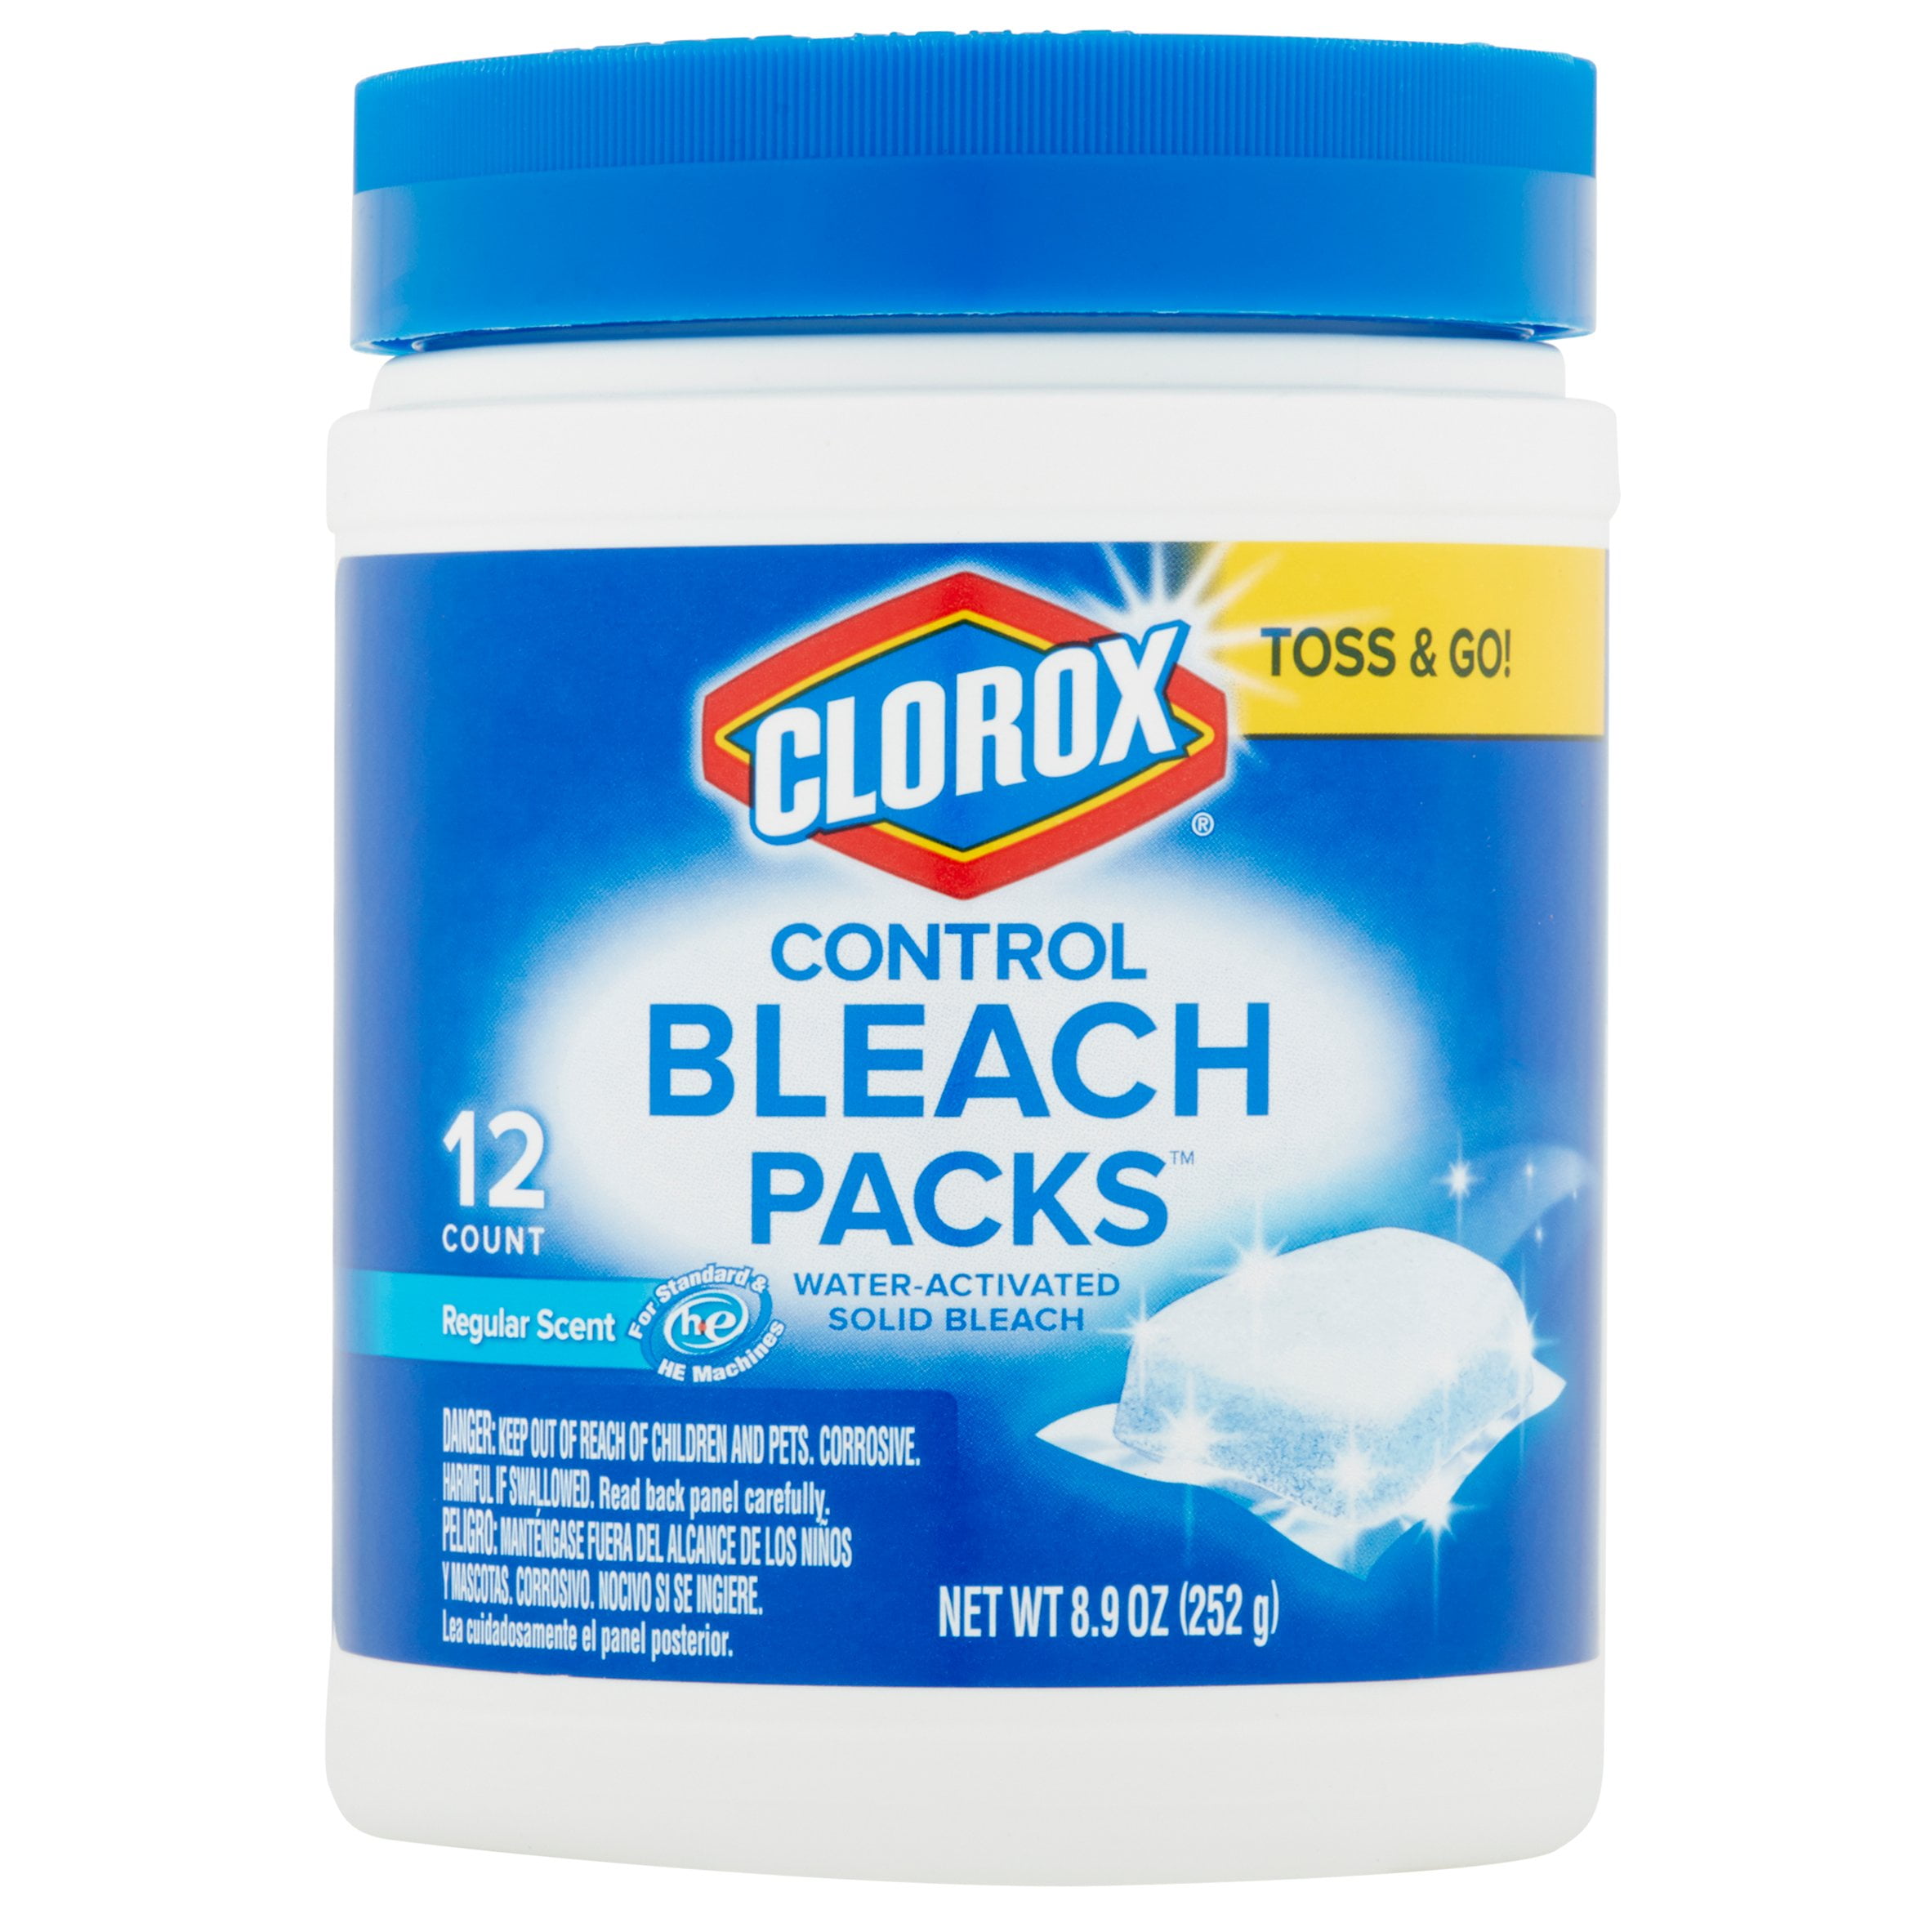 What is the chemical formula for Clorox?